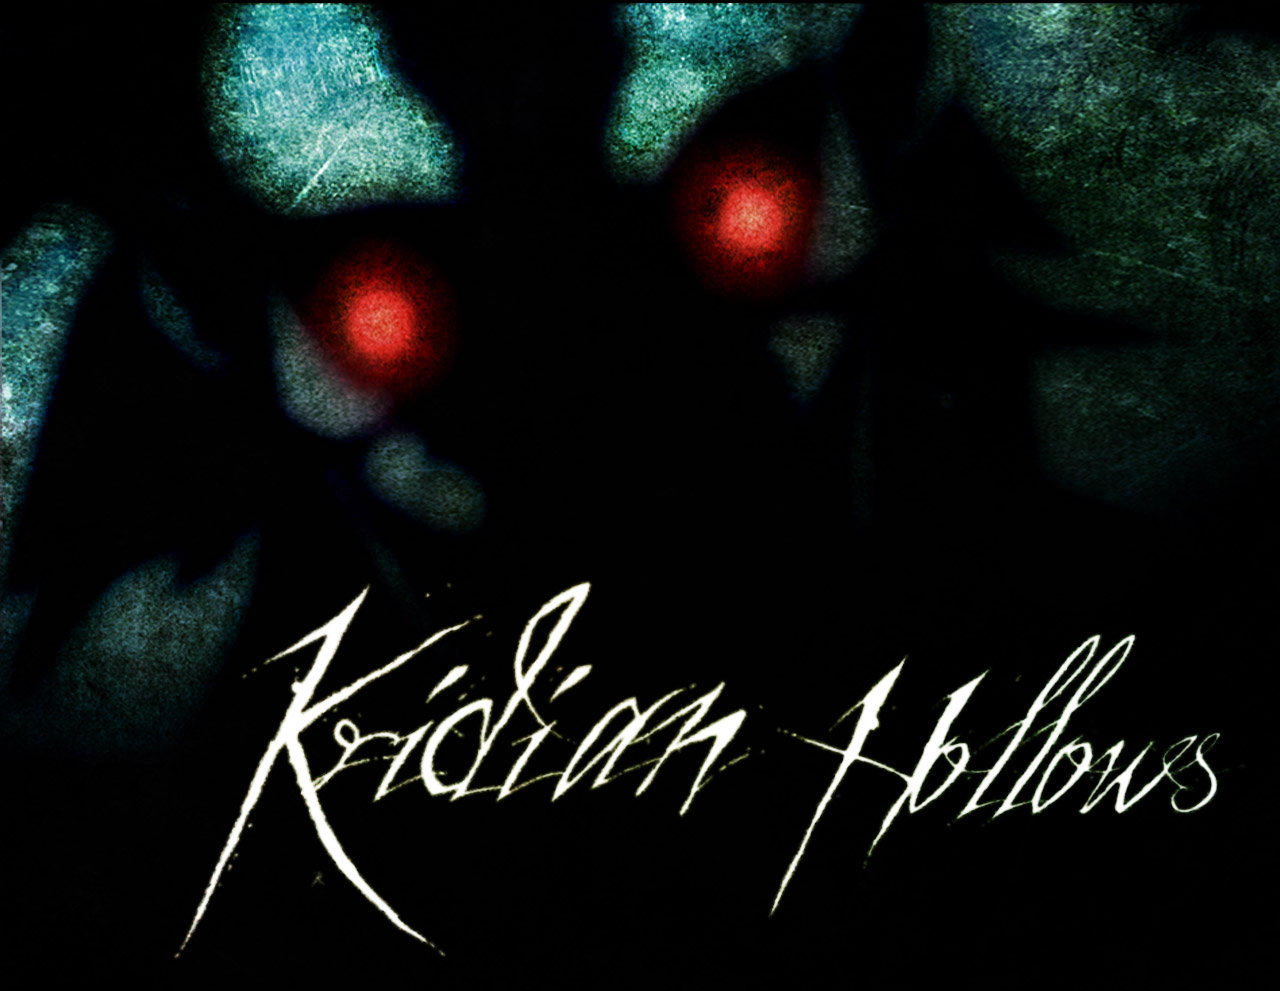 Kridian Hollows... Imagin starin at that...ur fucked dats all I can say... proper fucked!